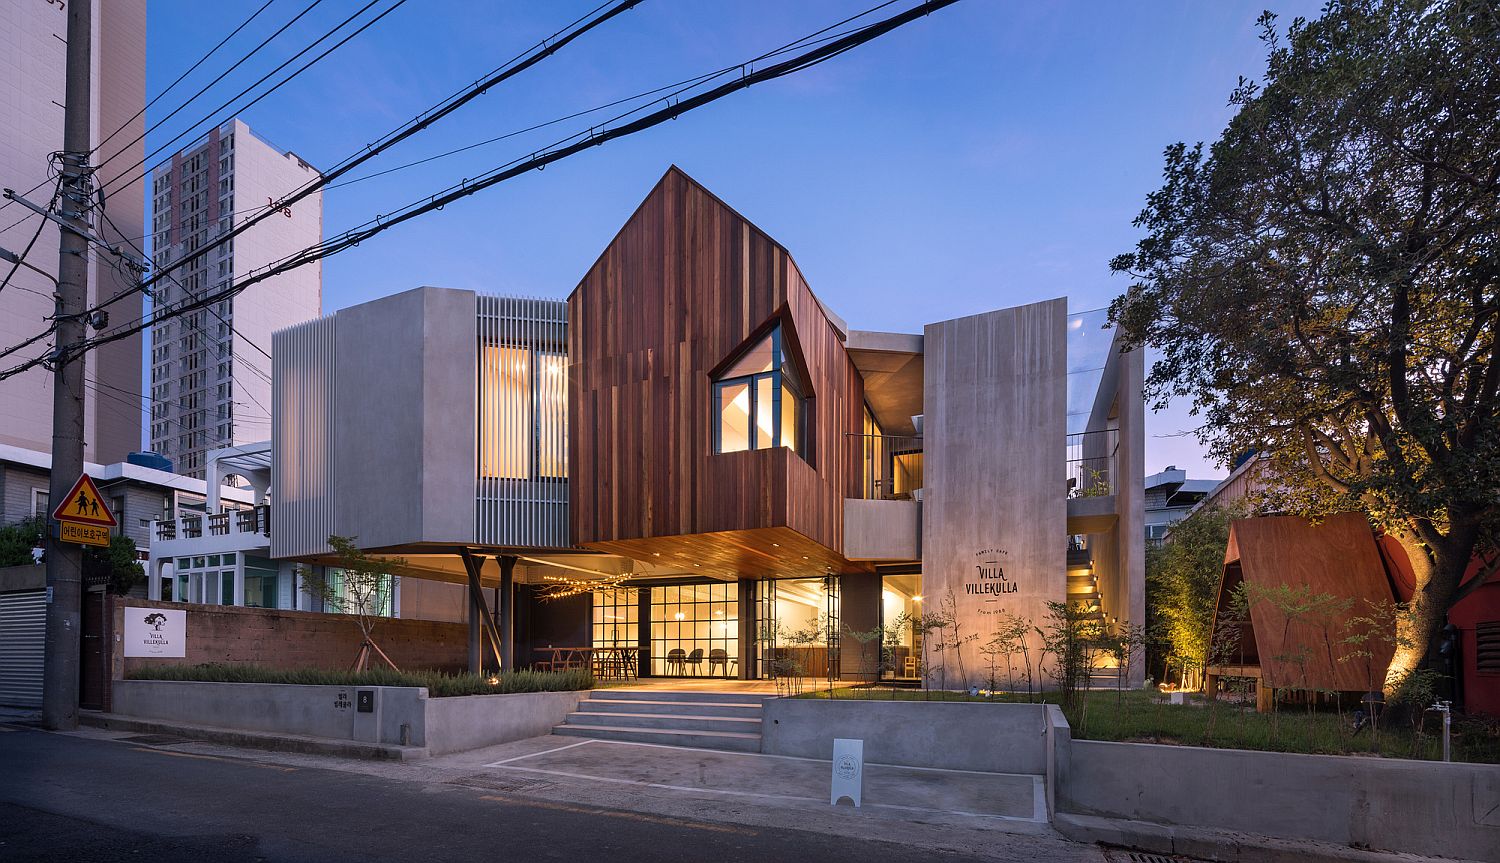 Wood-and-concrete-along-with-cantilevered-gable-structure-give-the-cafe-home-a-unique-look